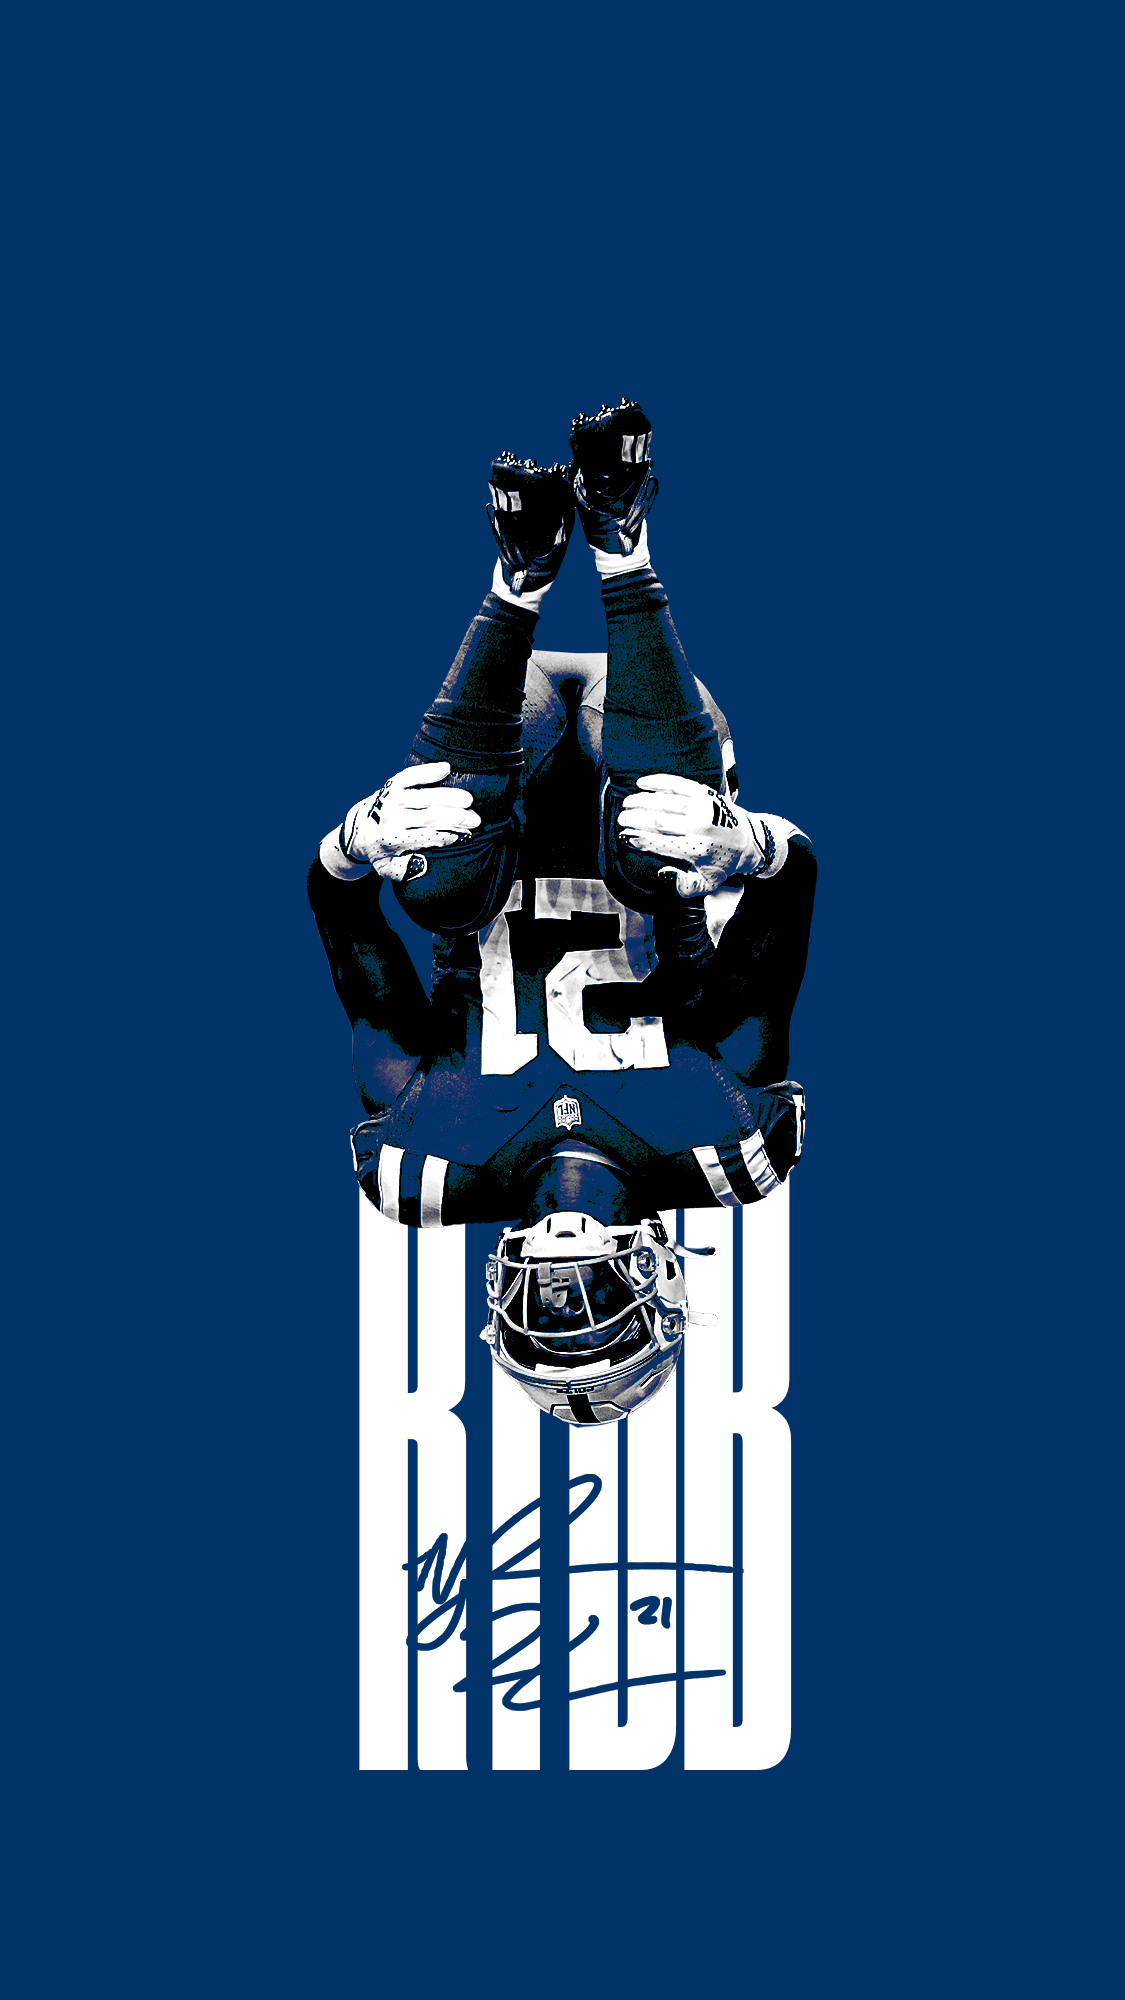 Colts Wallpapers | Indianapolis Colts 